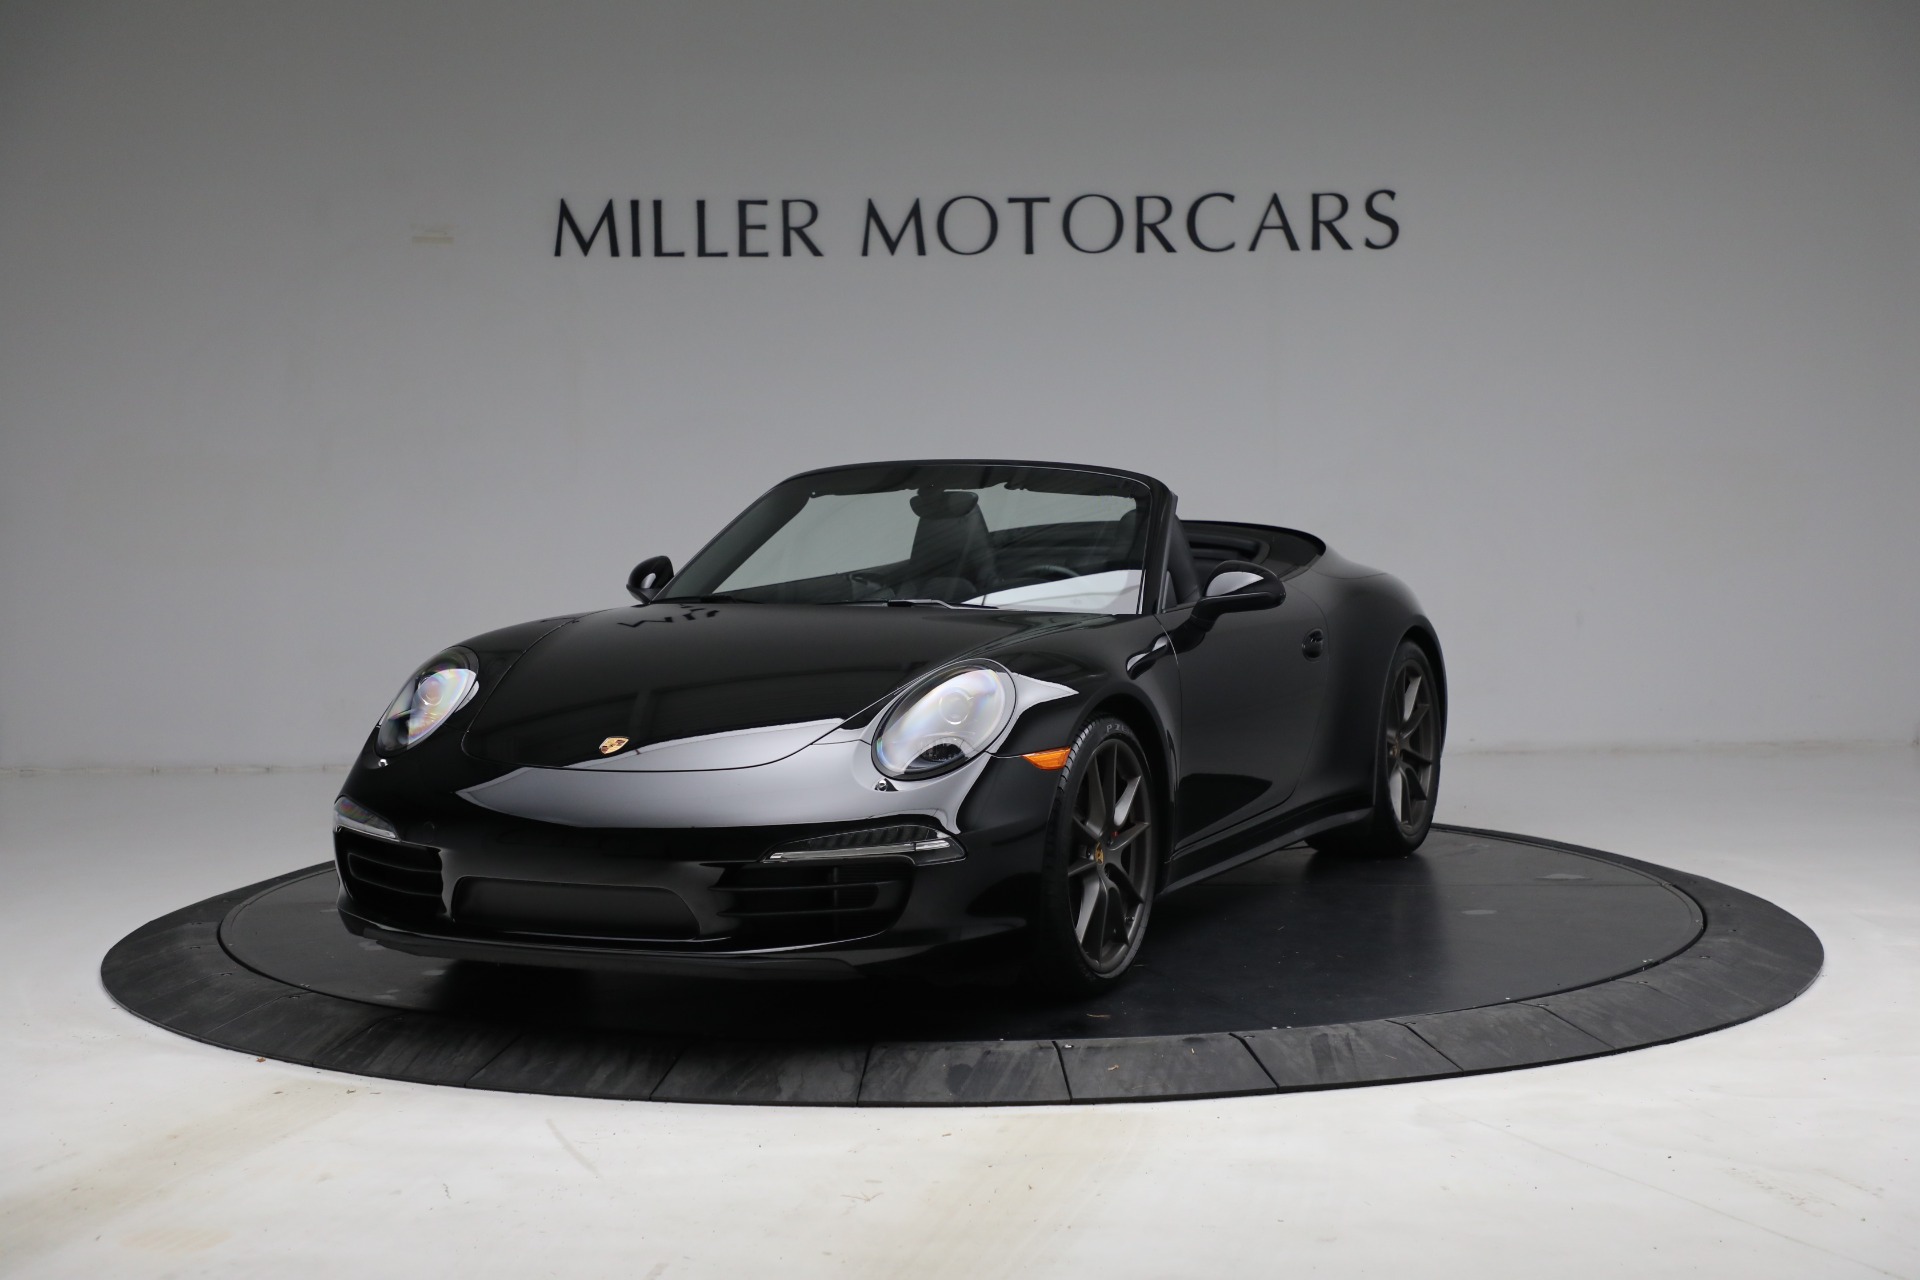 Used 2014 Porsche 911 Carrera 4S for sale Sold at Bentley Greenwich in Greenwich CT 06830 1